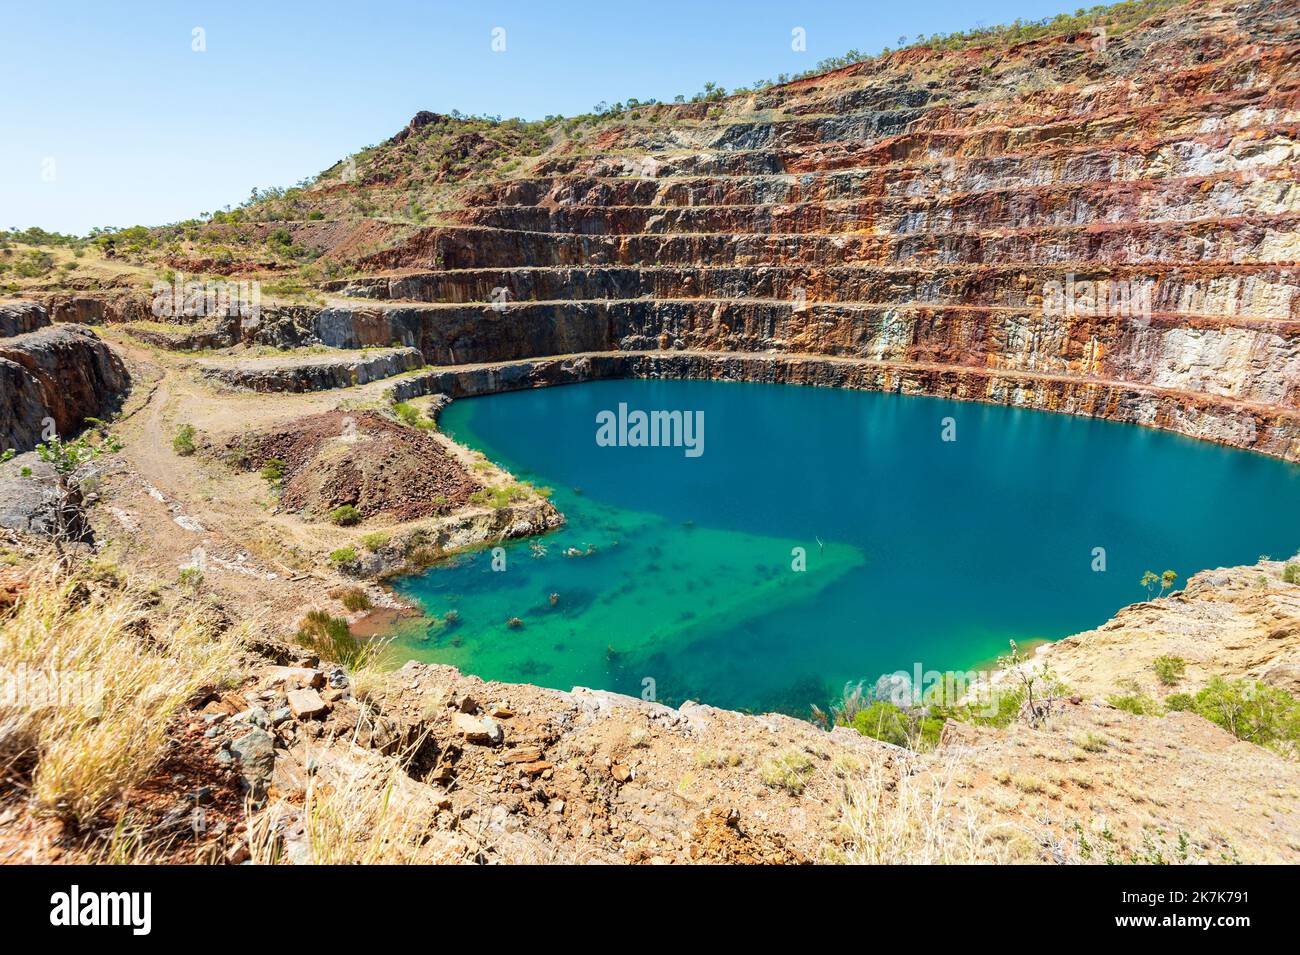 Mary Kathleen is an old abandonned uranium mine with toxic waters between Mount Isa and Cloncurry, North Western Queensland, QLD, Australia Stock Photo